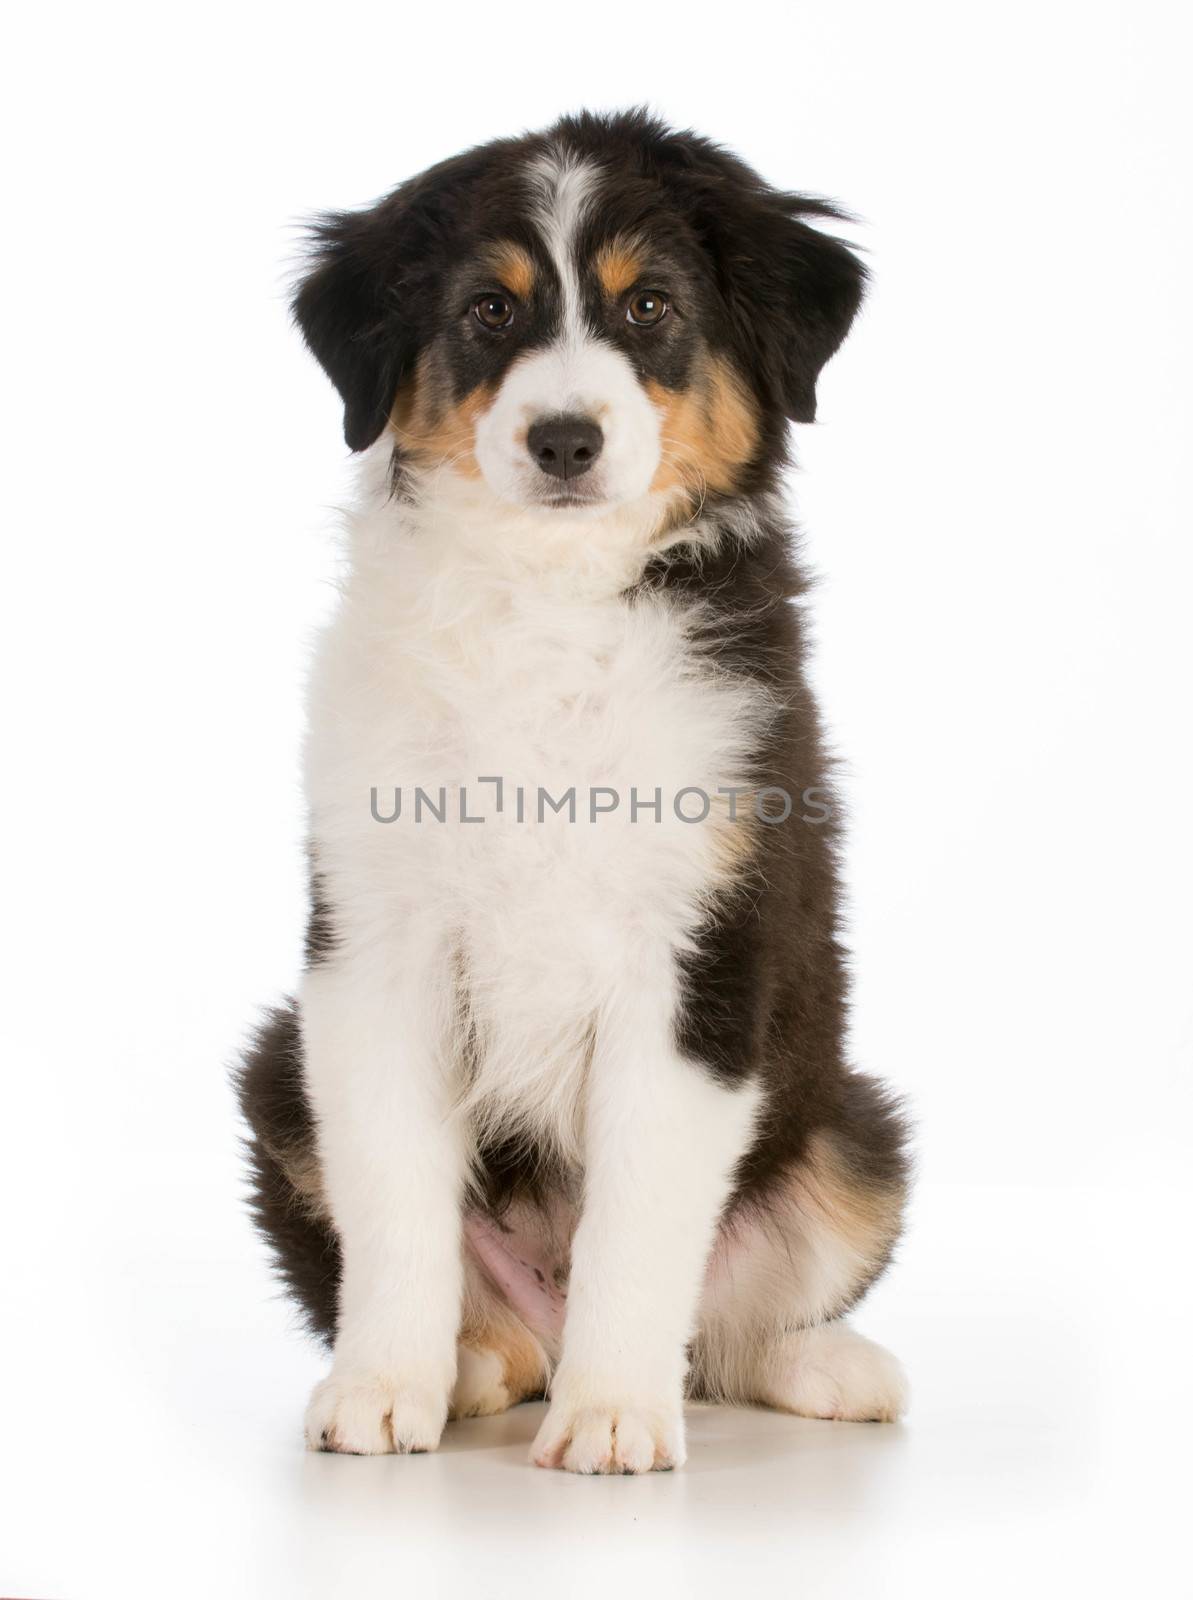 australian shepard puppy sitting isolated on white background